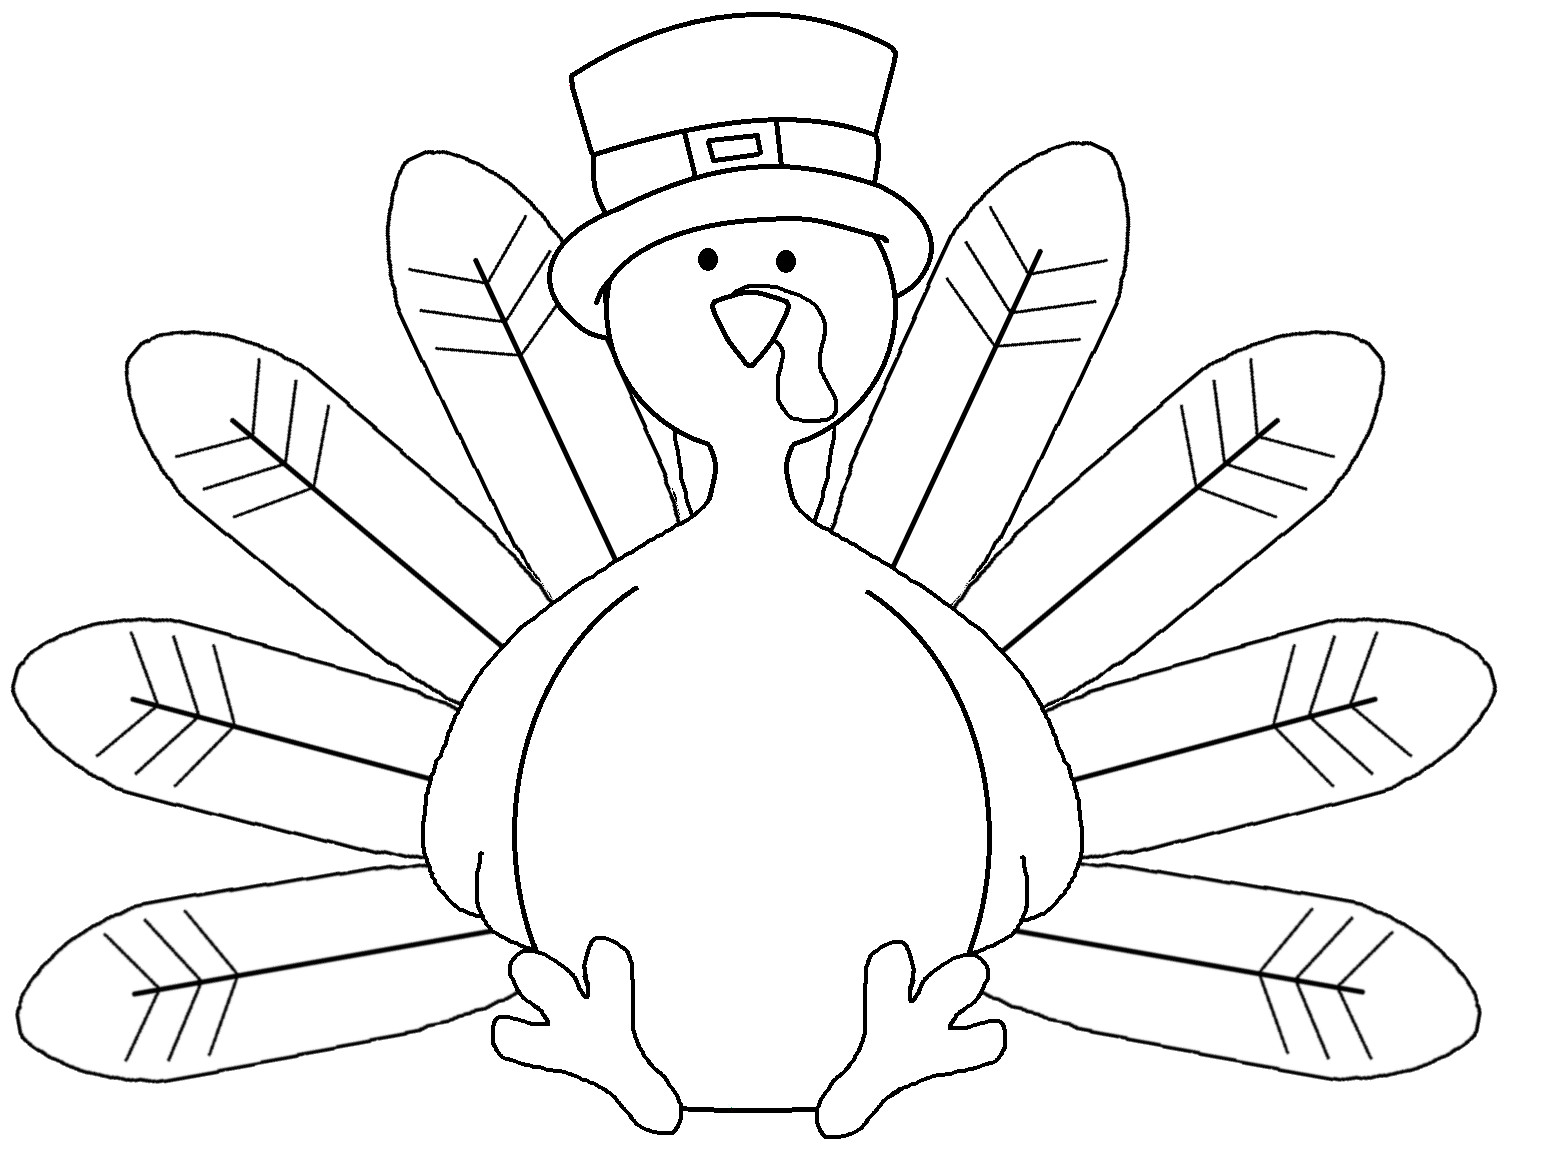 Thanksgiving Turkey Clipart Black And White
 Turkey black and white turkey clip art black and white